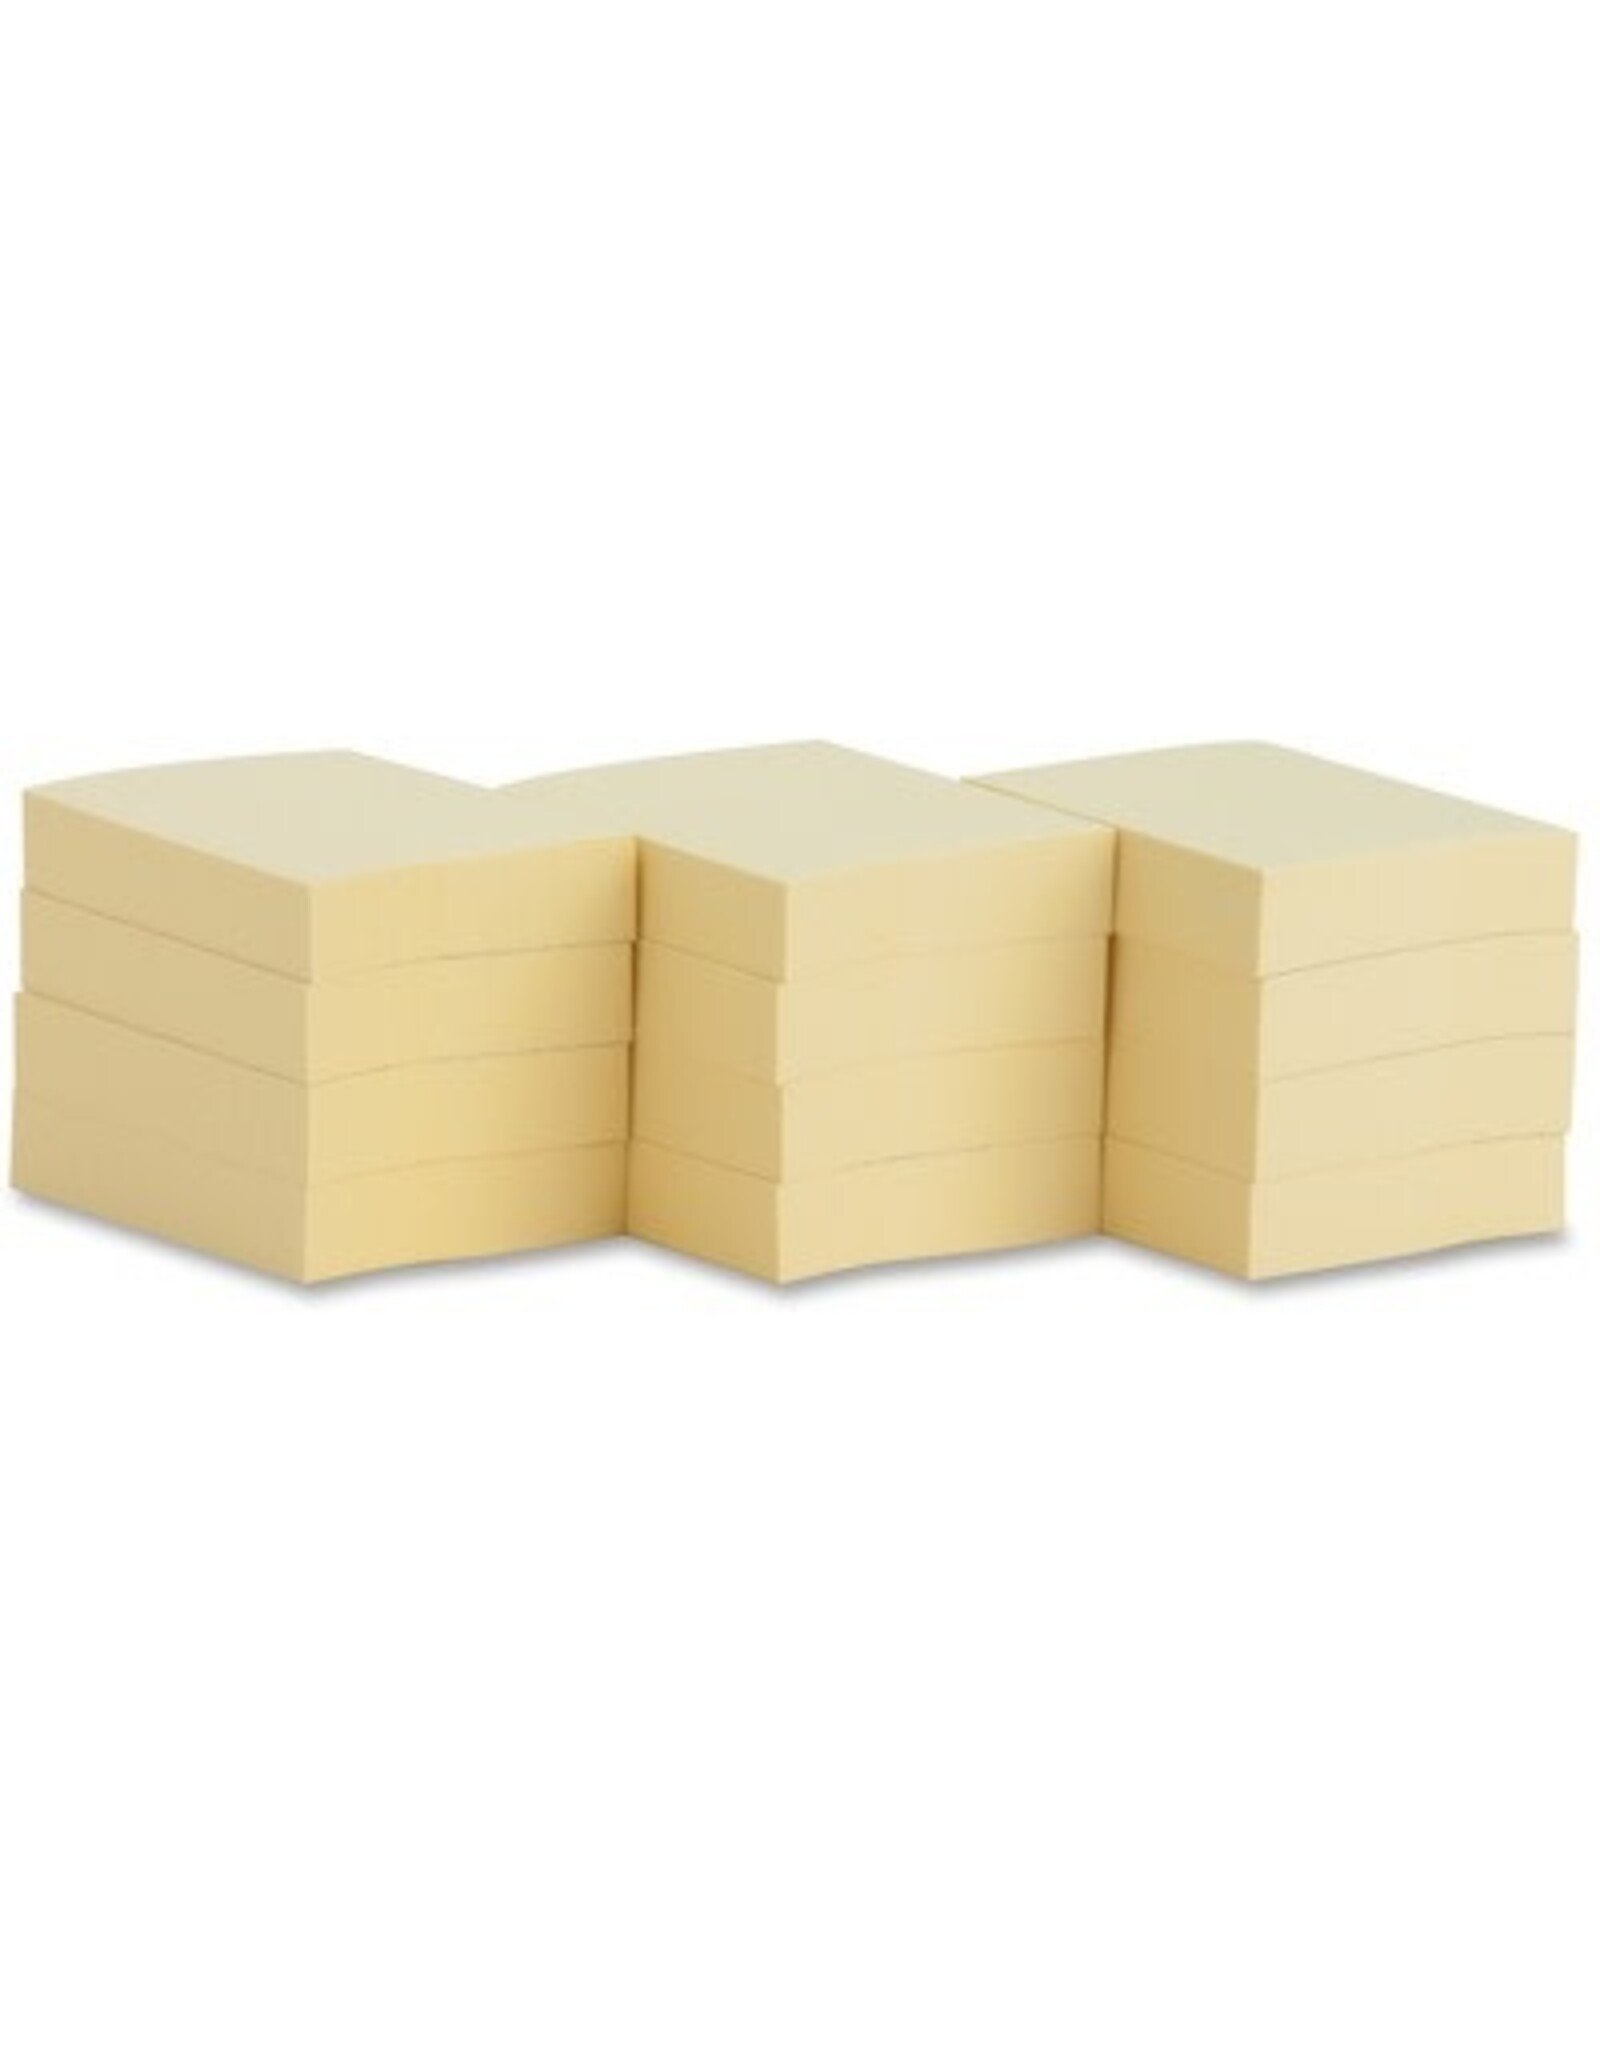 BUSINNESS SOURCE STICKY NOTES YELLOW 1-3/8"x1-7/8" - 12 PADS ( 1,200 SHEETS )